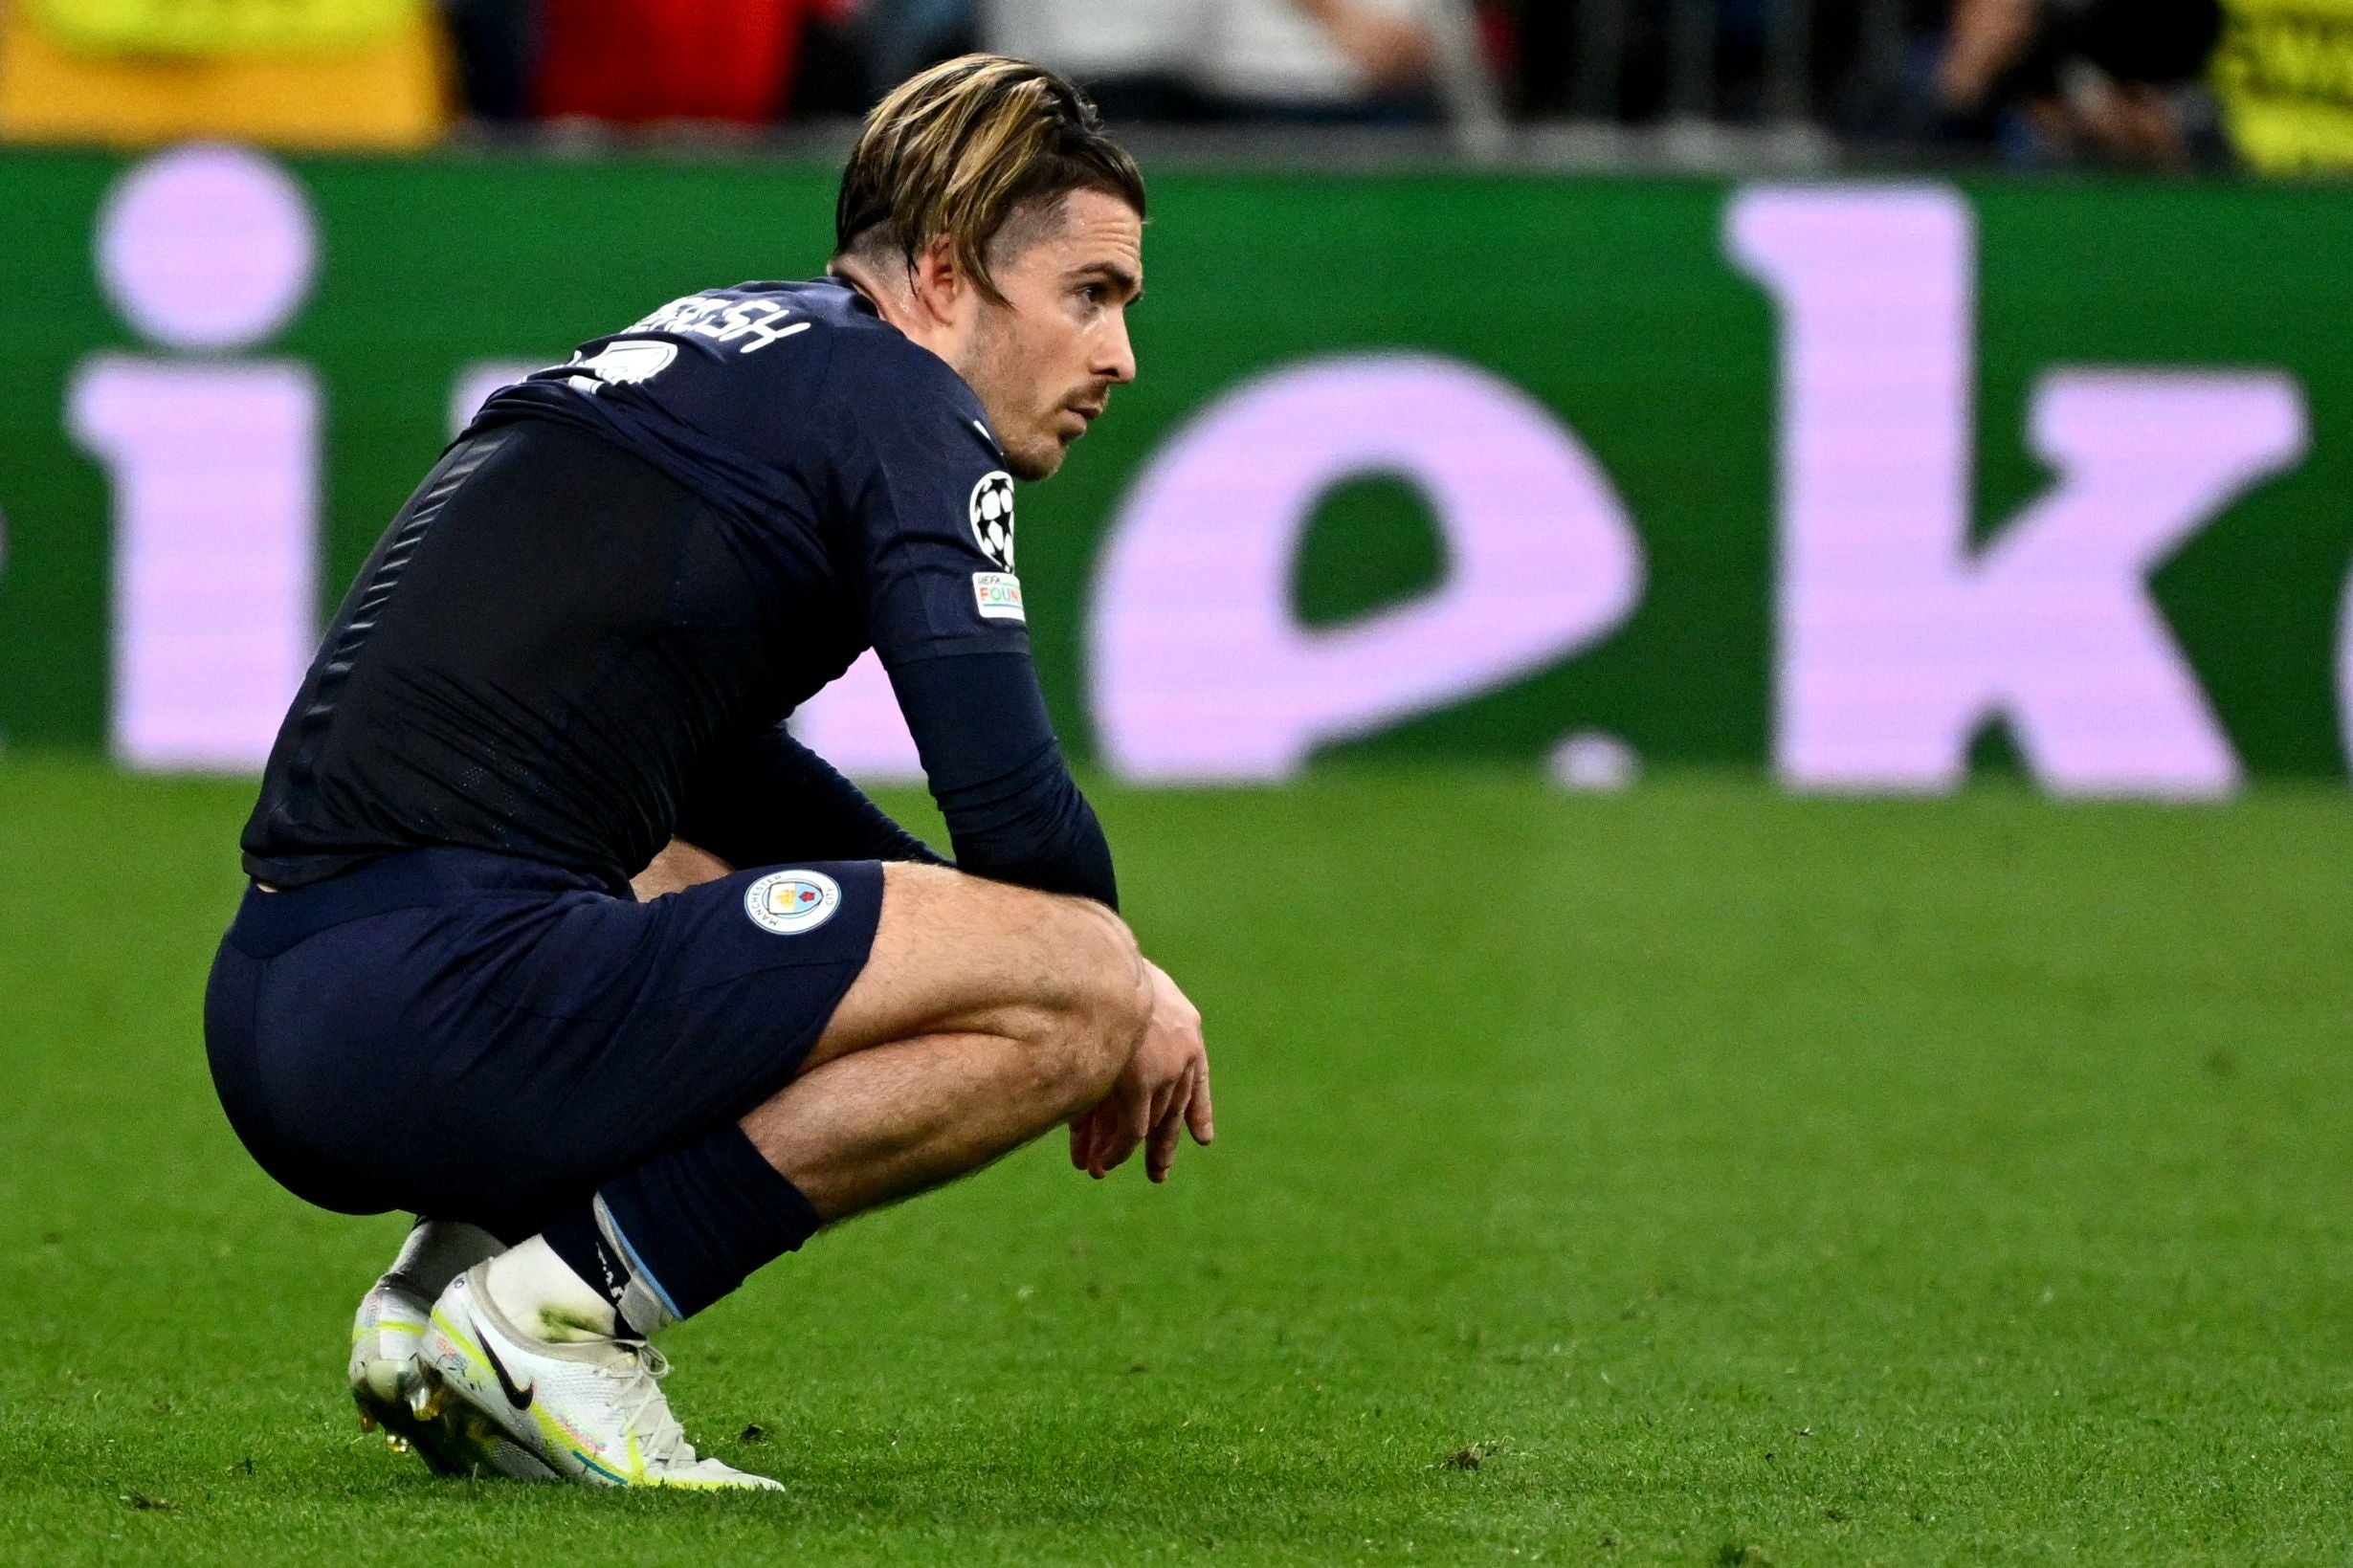 Jack Grealish mised two gilt-edged opportunities in Man City’s Champions League semi-final second-leg defeat to Real Madrid